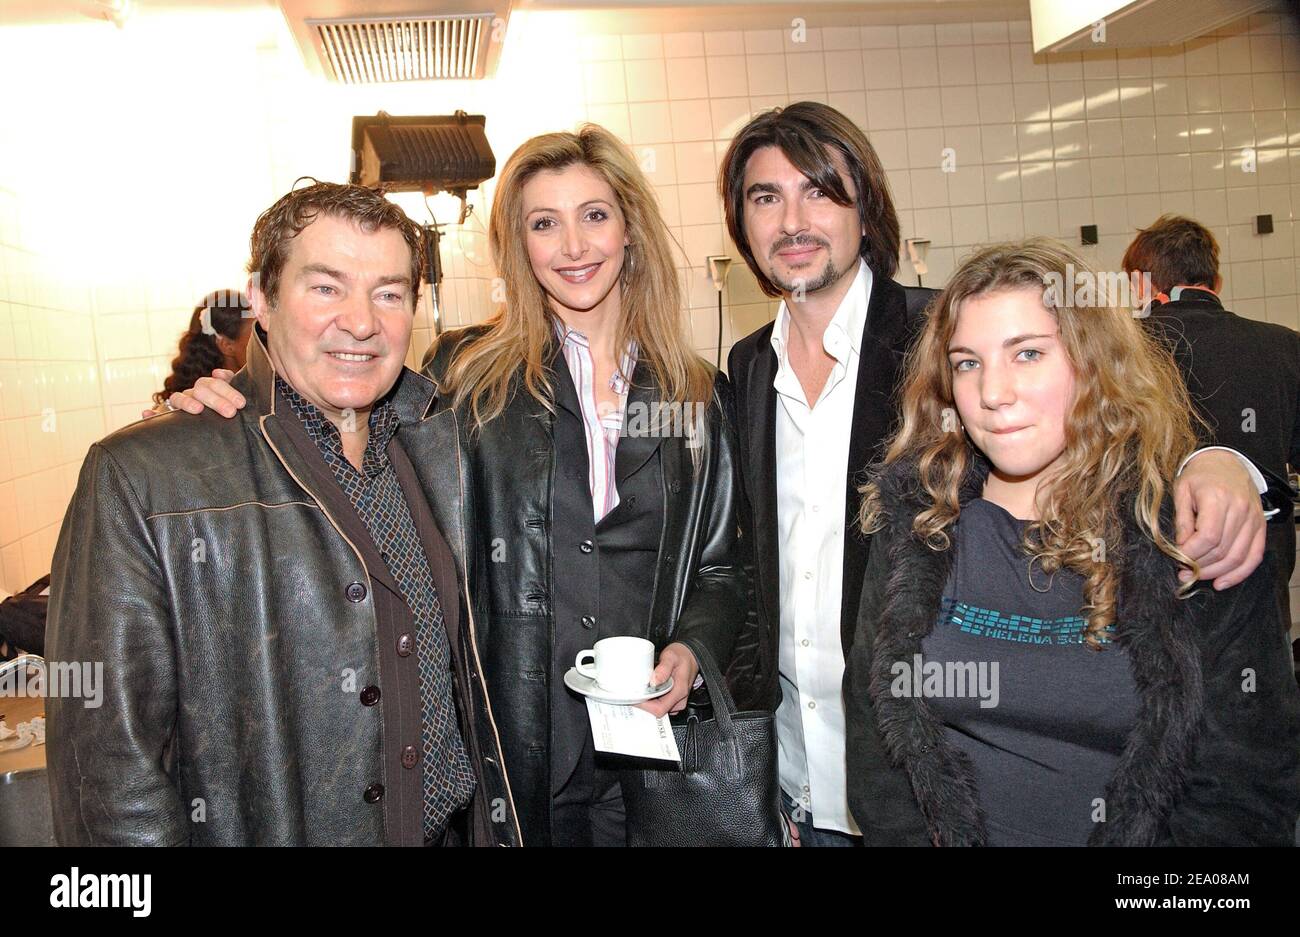 French actor Martin Lamotte, his wife, his daughter and French fashion designer Stephane Rolland on the backstage of Jean-Louis Scherrer Fall-Winter 2005-2006 Ready-to-Wear Fashion collection presentation in Paris, France on March 6, 2005. Photo by Klein-HounsfieldABACA. Stock Photo